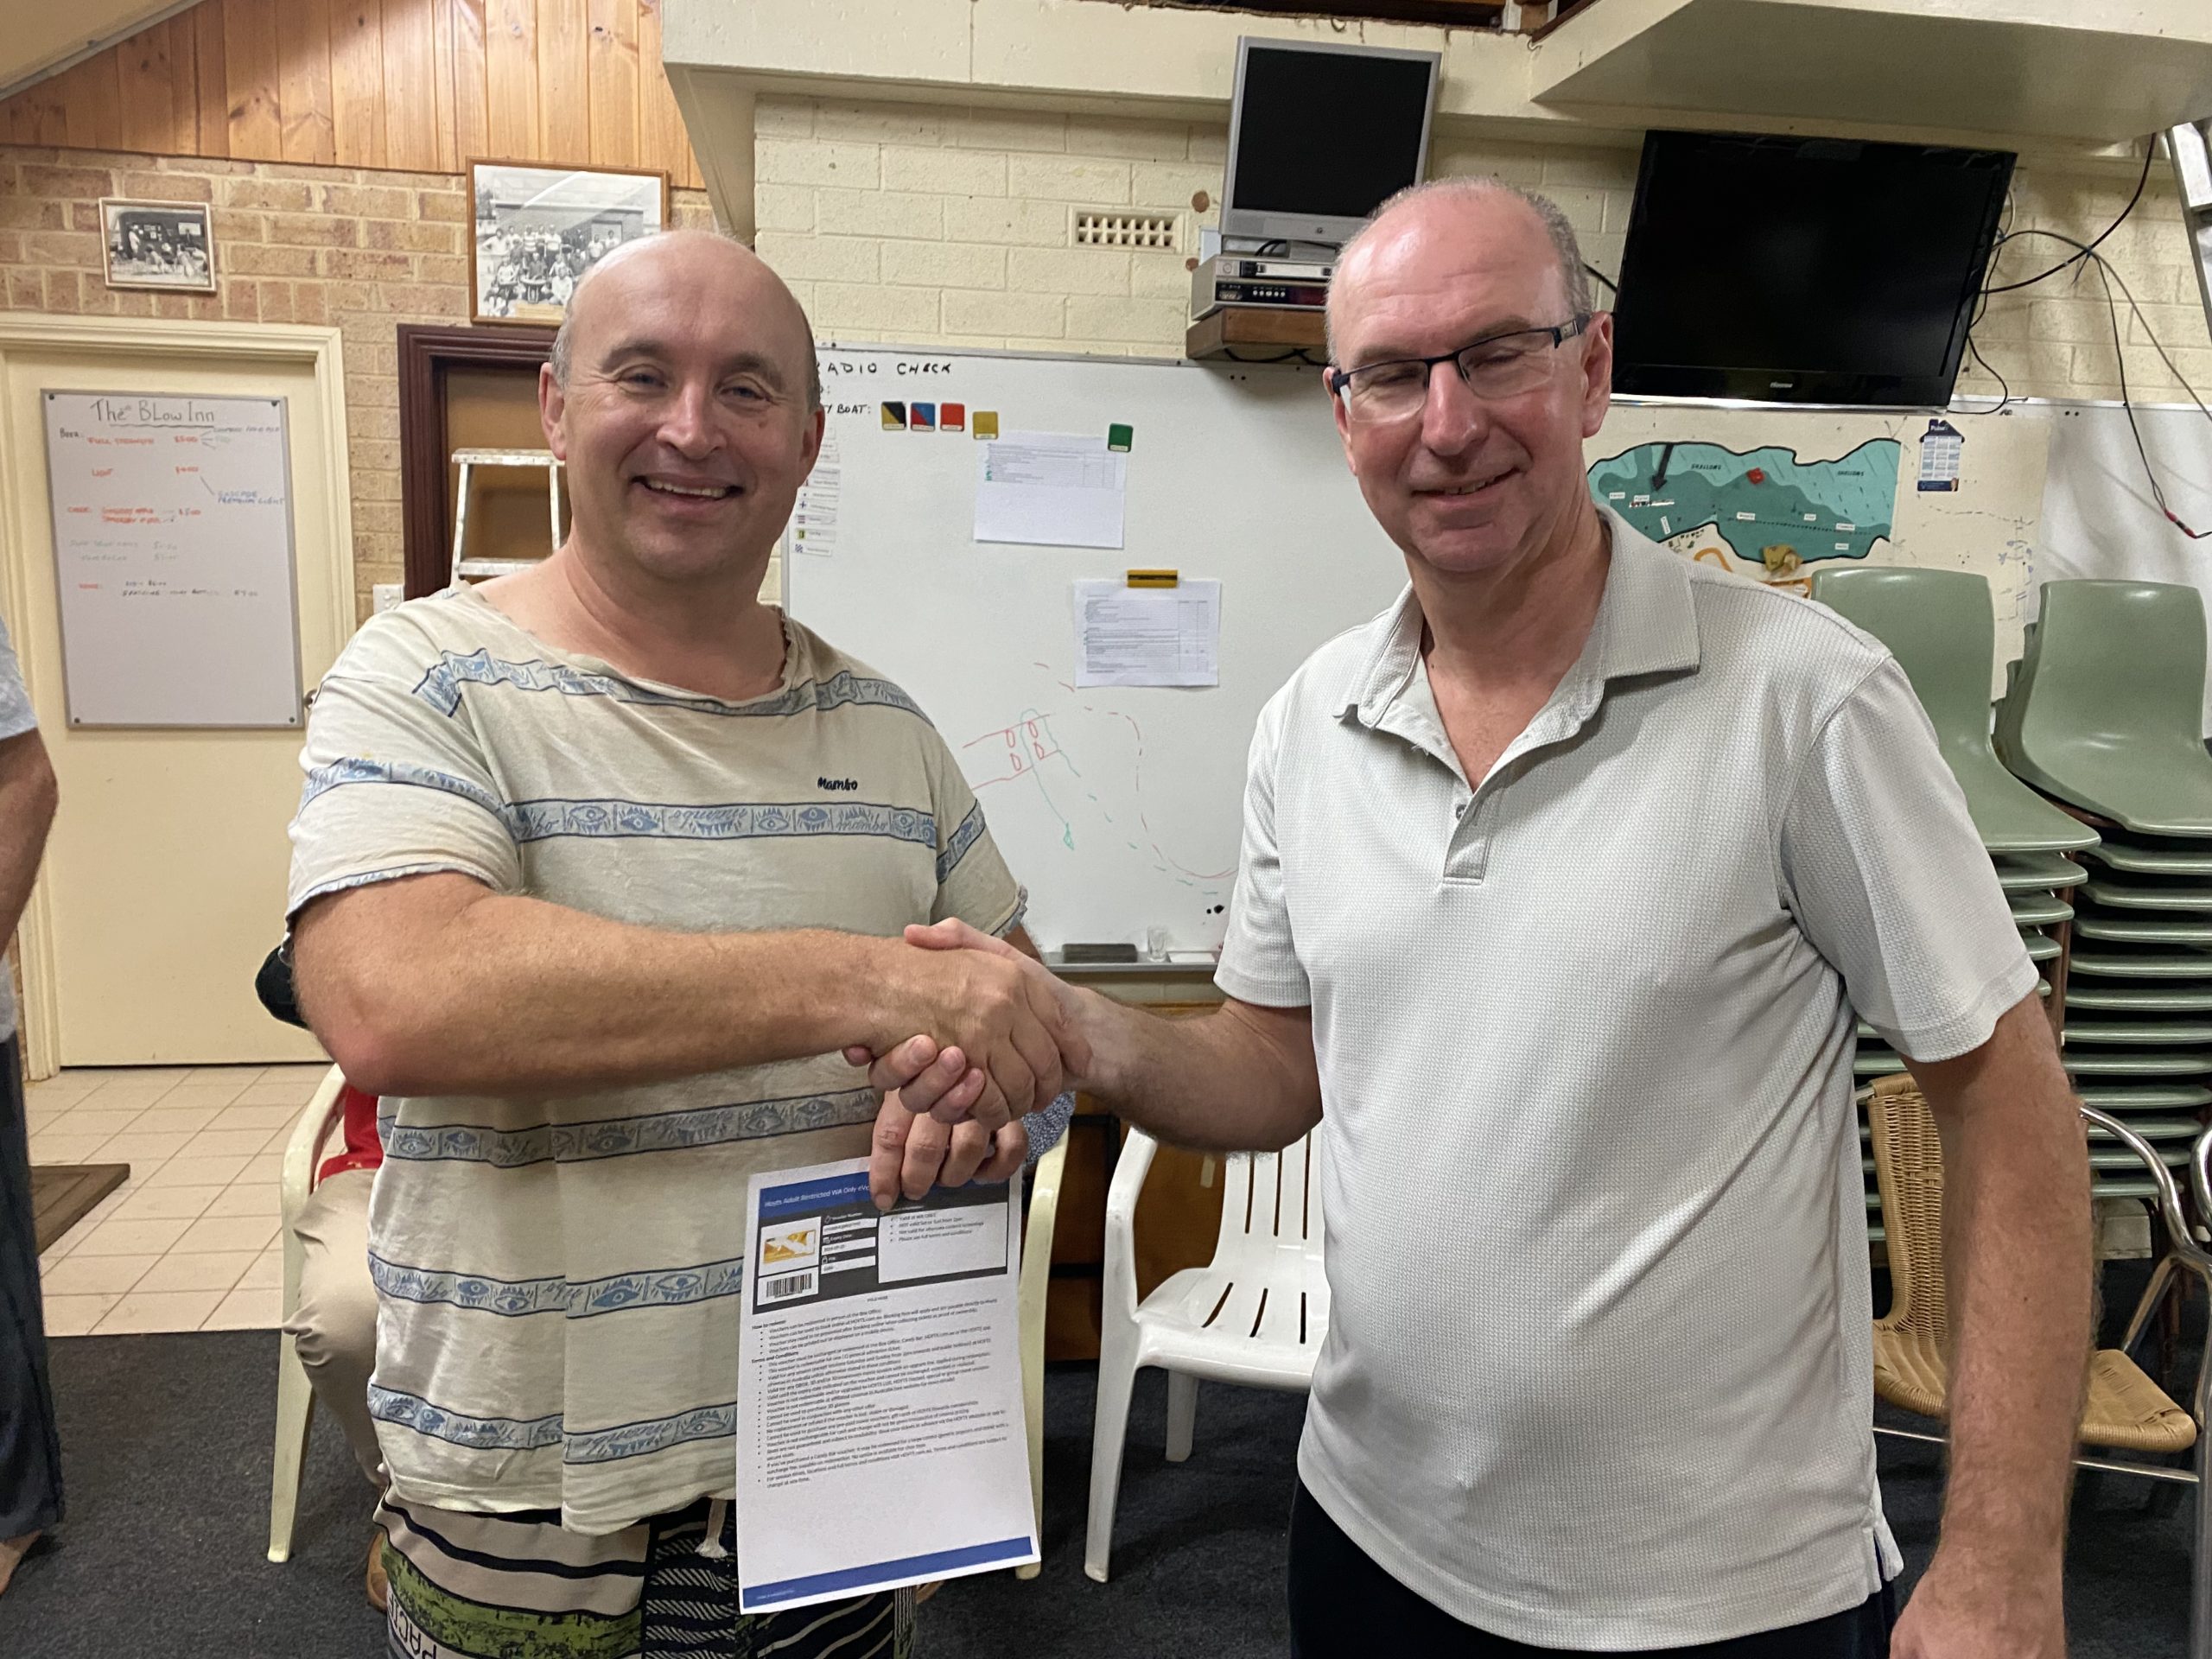 Tuesday 28th September 2021 : Tonight’s photos shows Club Treasurer David Urquhart presenting tonight’s winner Mike Galanty with a movie voucher.